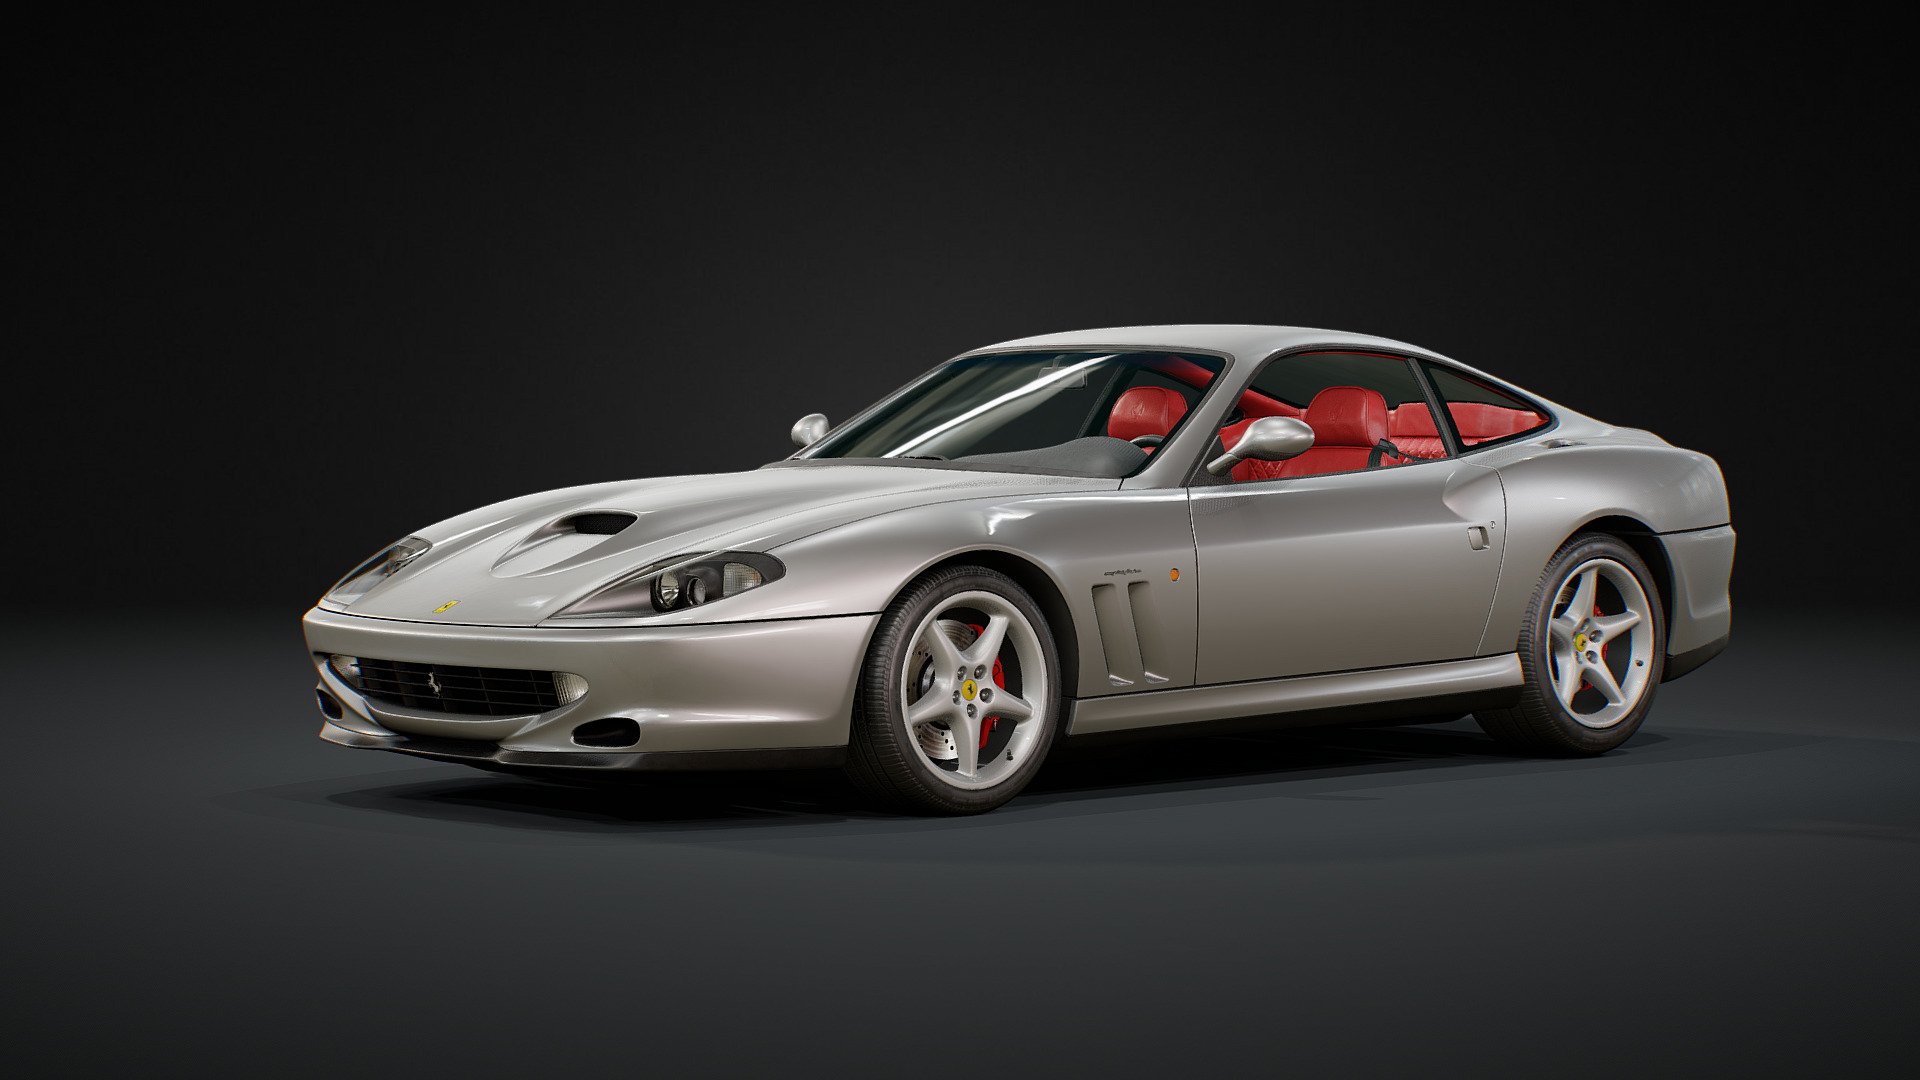 This is the public version of the 550 Maranello configurator available at Wire Wheels Club:

https://wirewheelsclub.com/configurator/96-ferrari-550-maranello/

Making a configurator is quite challenging, more for people (like me) with no idea about JavaScript, but the Sketchfab API is great l and I'm very happy with the result. I only hope you enjoy it as much as I do.

The model is available for download for free (no textures) at wirewheelsclub.com. The textured version is in Gumroad and ArtStation, and will be in the SF store very soon.

Best regards and happy Christmas! - '96 Ferrari 550 Maranello - Viewer version - 3D model by Luis Lara (@GranDosicua) 3d model